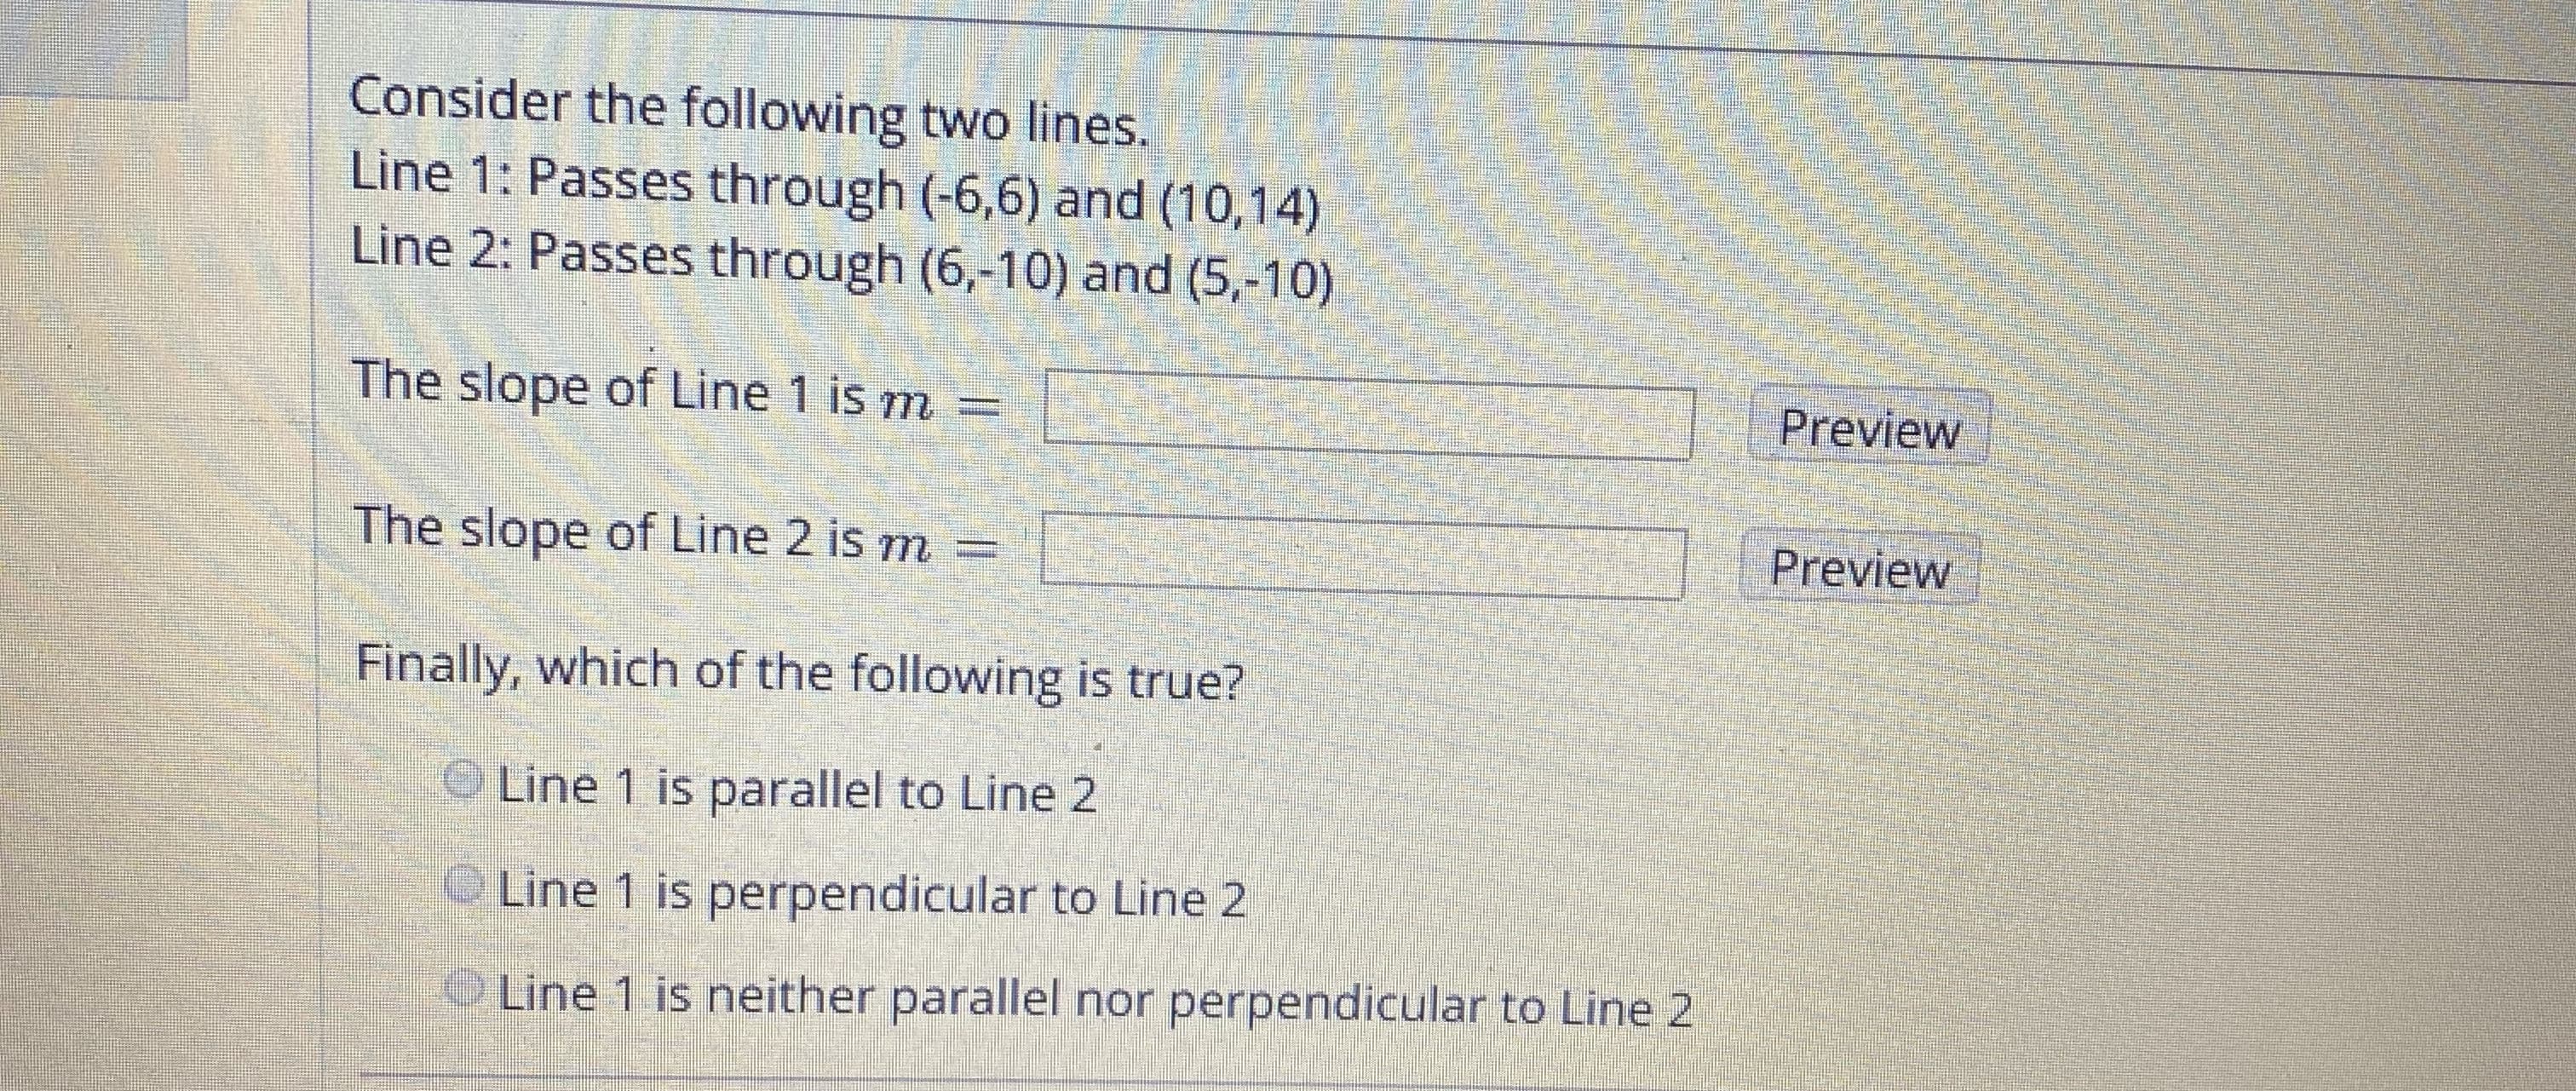 Consider the following two lines.
Line 1: Passes through (-6,6) and (10,14)
Line 2: Passes through (6,-10) and (5,-10)
The slope of Line 1 is m =
Preview
T Preview
The slope of Line 2 is m =
Finally, which of the following is true?
O Line 1 is parallel to Line 2
Line 1 is perpendicular to Line 2
Line 1 is neither parallel nor perpendicular to Line 2
